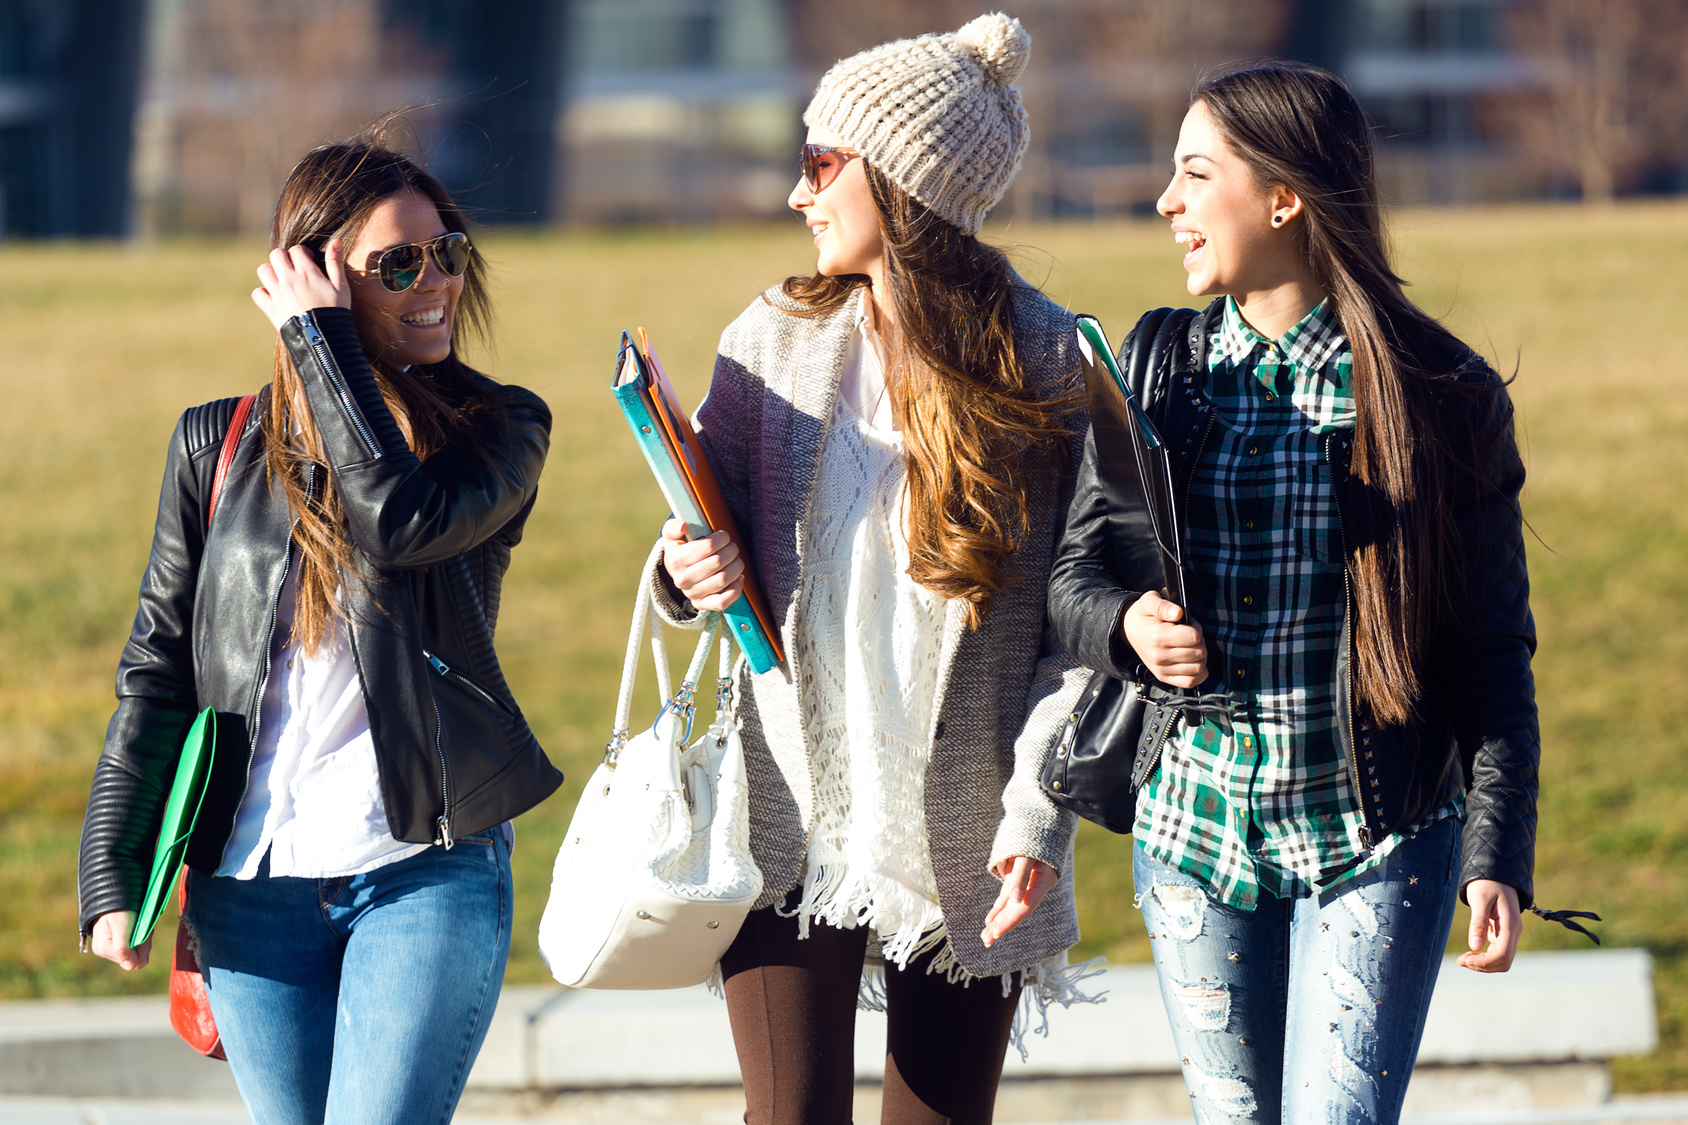 Three students girls walking in the campus of university.